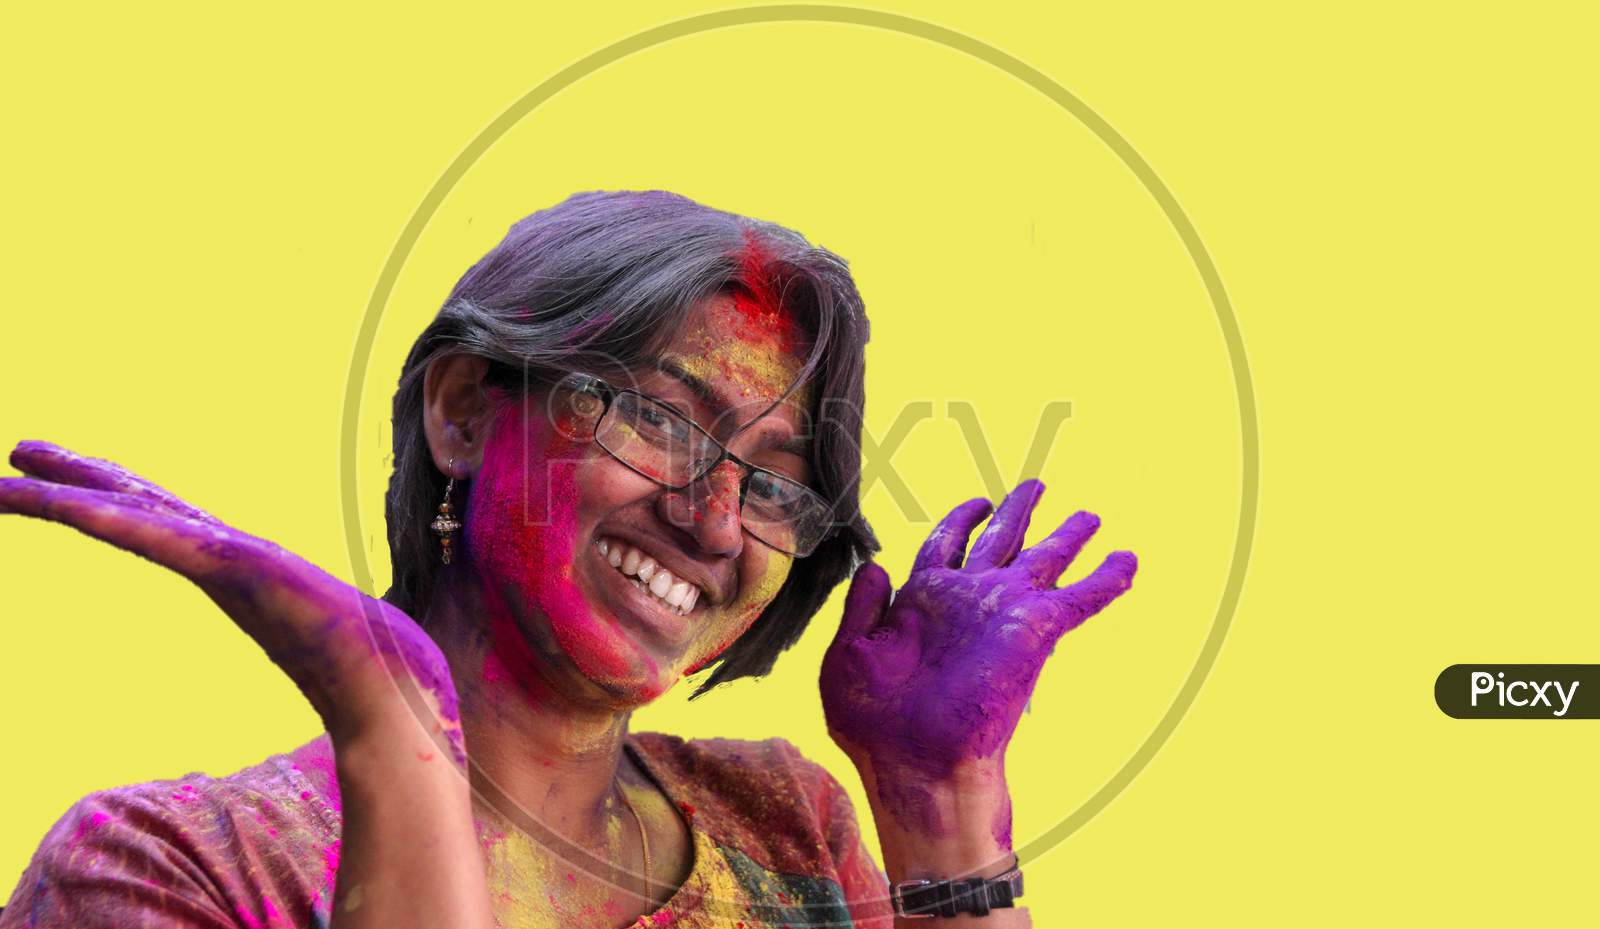 Portrait Of A Young Lady With Holi Colours On Face Smiling At The Camera With Isolated Solid Yellow Background.